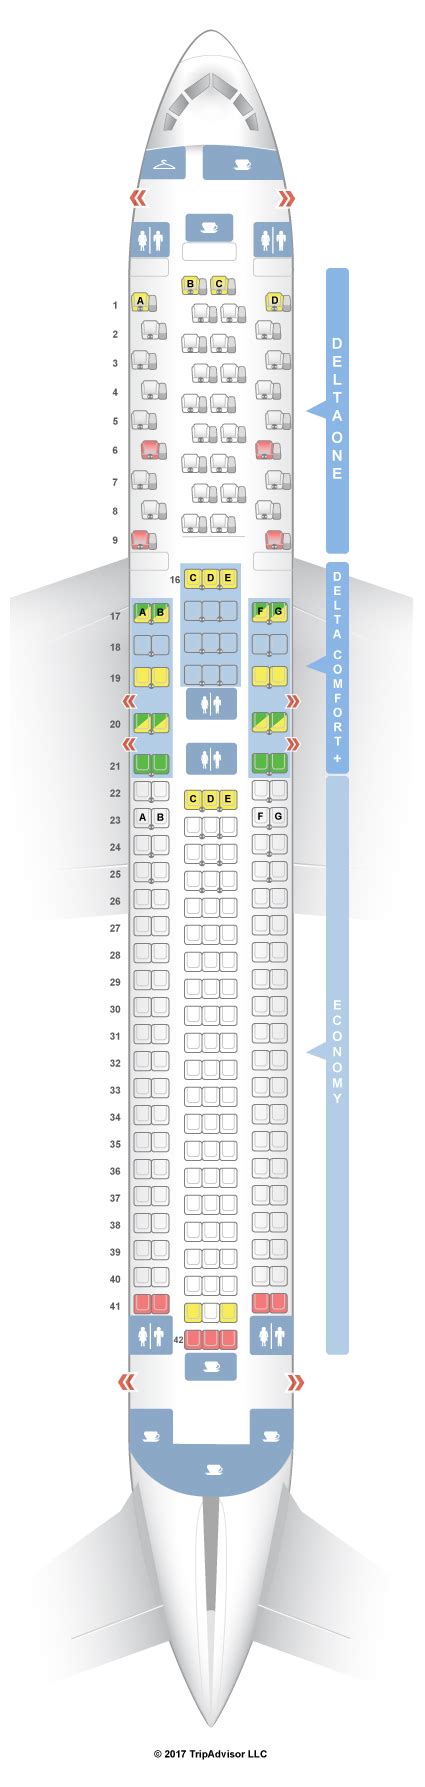 Delta seatguru 767-300 - Viewing. Boeing 767-400ER (764) Layout 2. Open Suite Delta One (Rows 1-9) Recliner Delta Premium Select (Rows 20-23) Standard Delta Comfort+ (Rows 30-33) Standard Economy (Rows 34-57) View map. For your next Delta flight, use this seating chart to get the most comfortable seats, legroom, and recline on . 